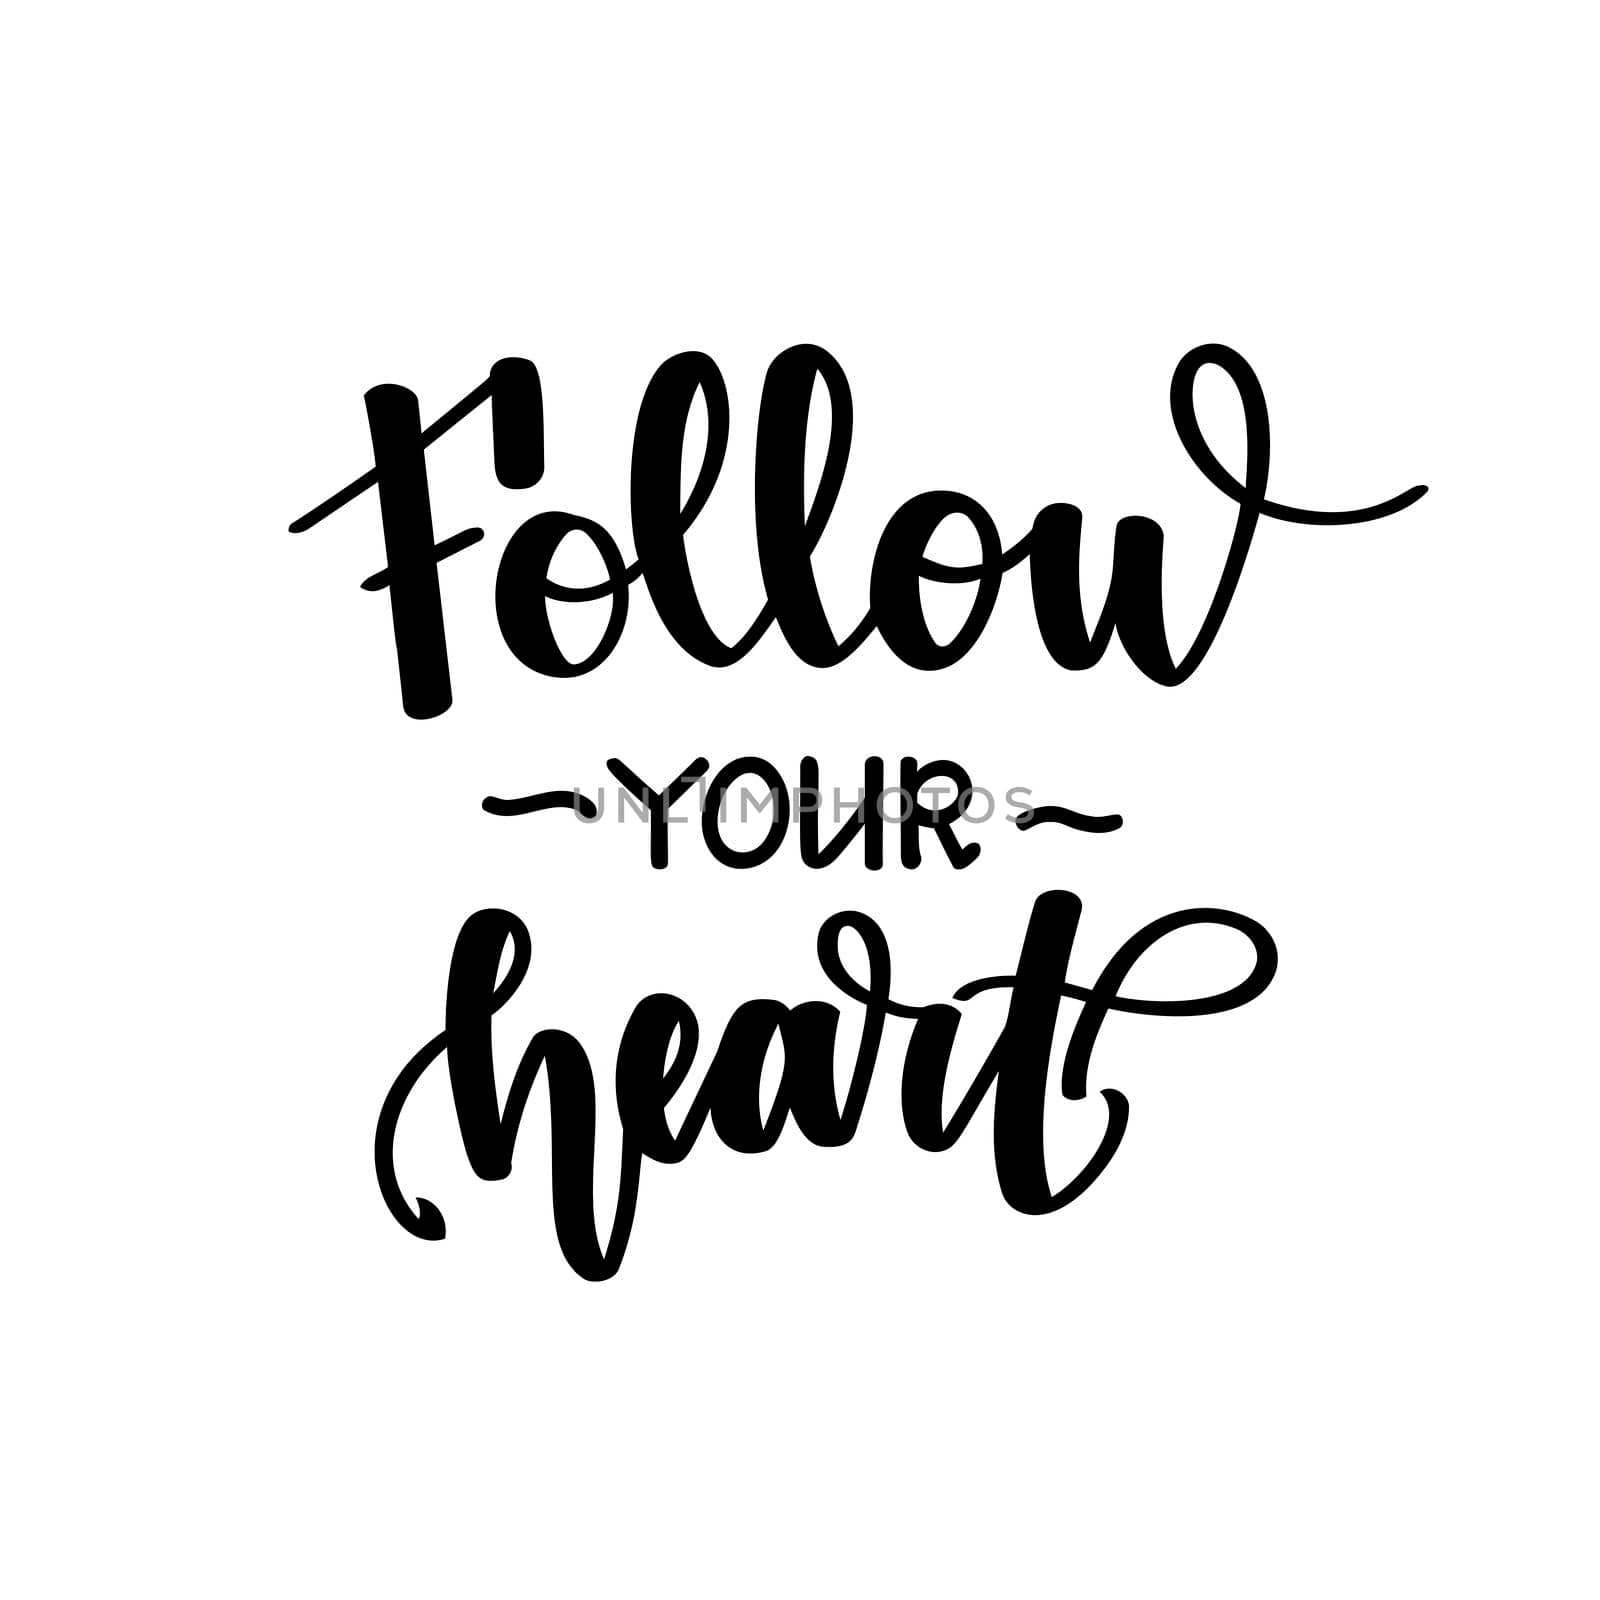 Follow your heart. Motivational and inspirational handwritten lettering isolated on white background. illustration for posters, cards, print on t-shirts and much more by Marin4ik